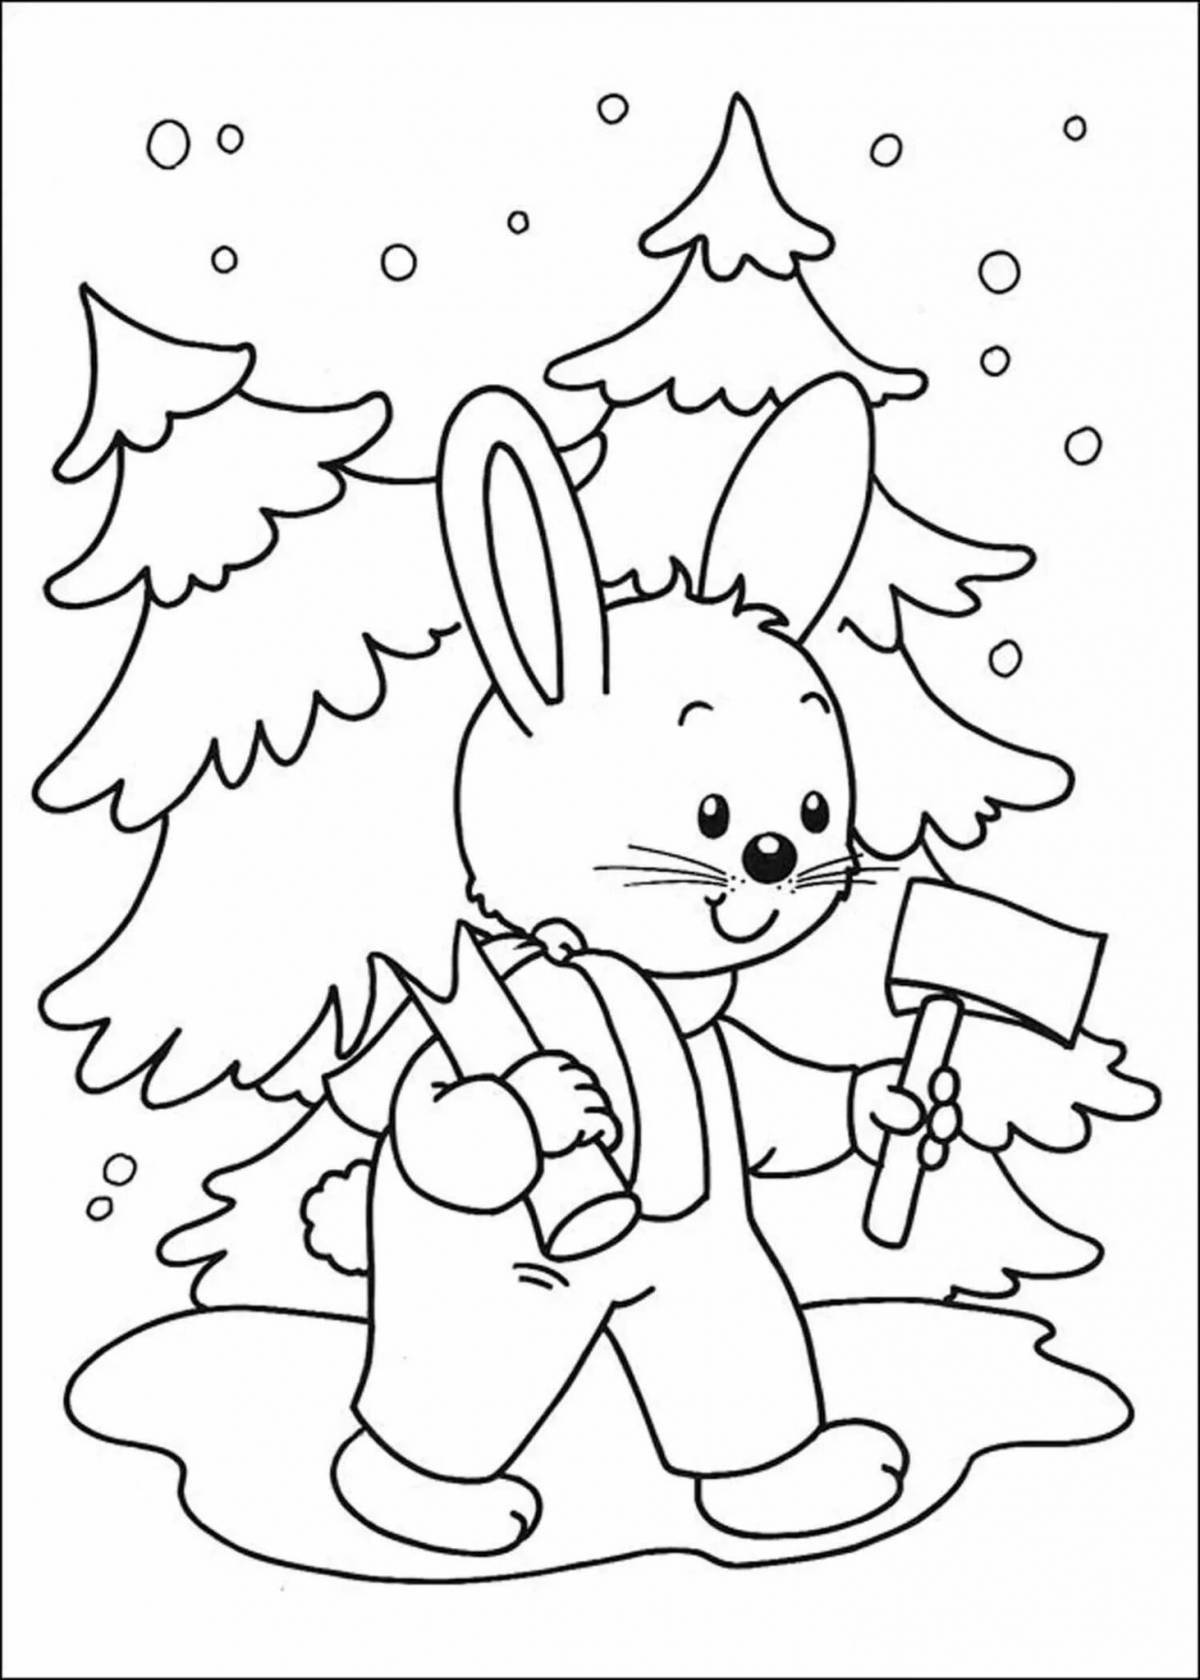 Happy Christmas coloring book